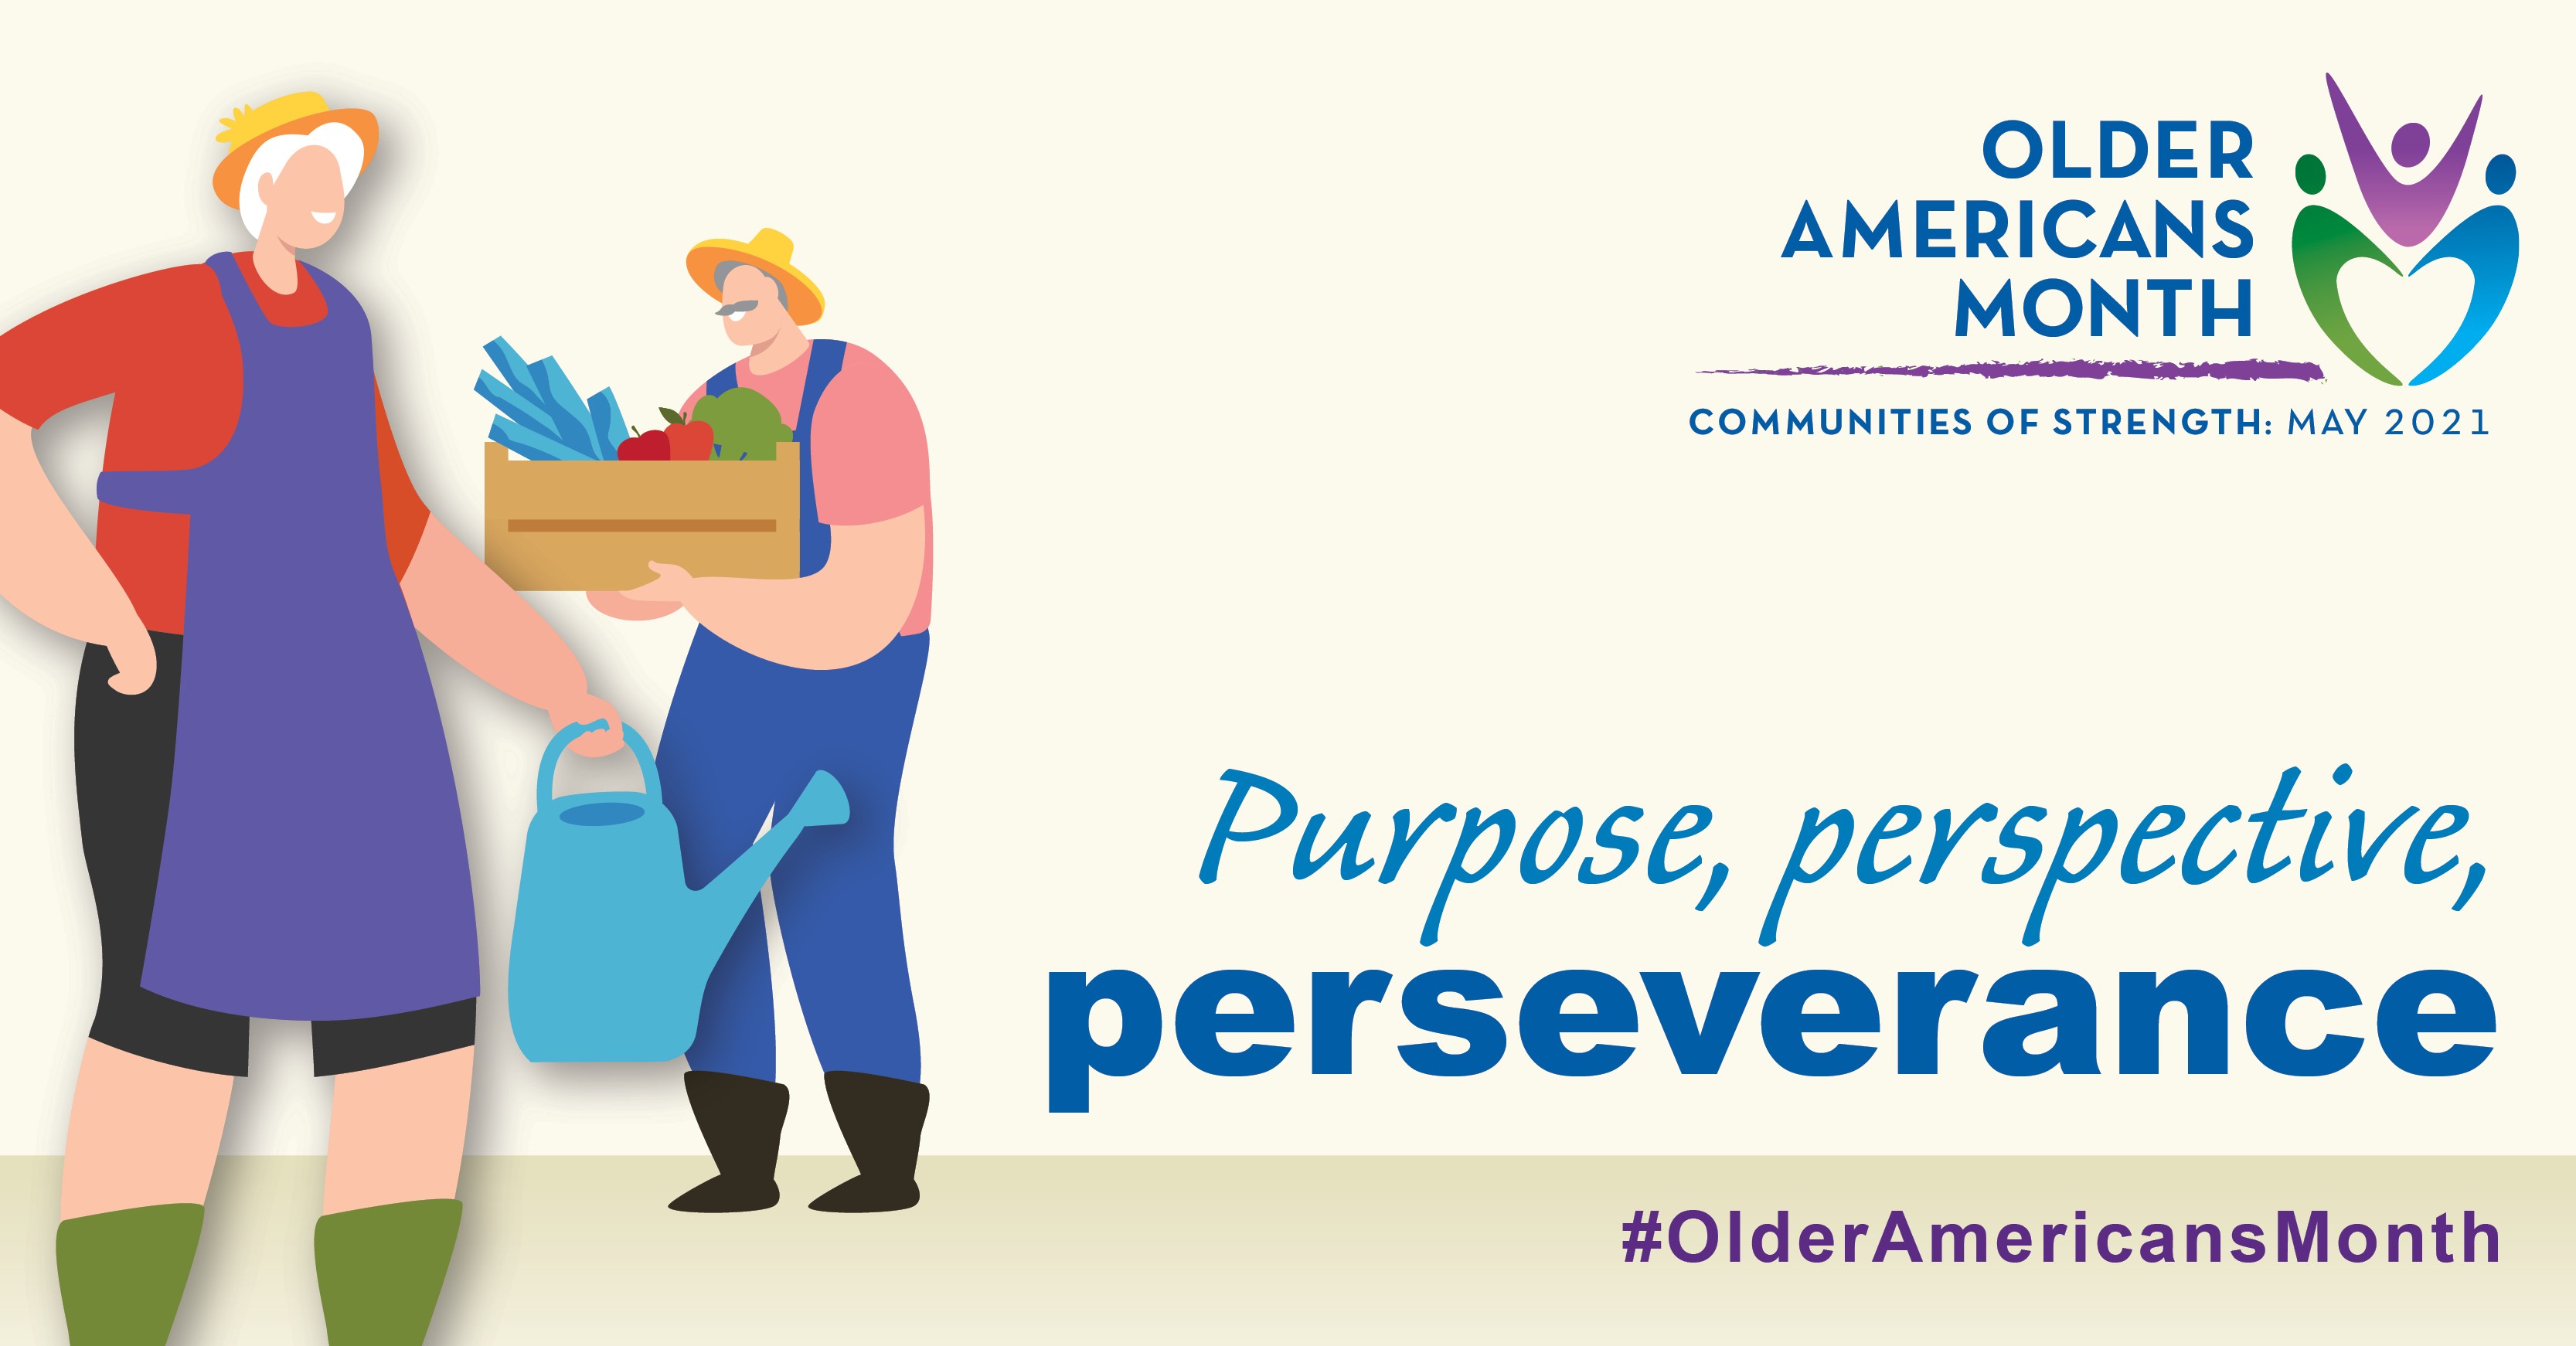 Social Media Cover Image: Older Americans Month, Communities of Strength, May 2021. Purpose, perspective, perseverance. #OlderAmericansMonth